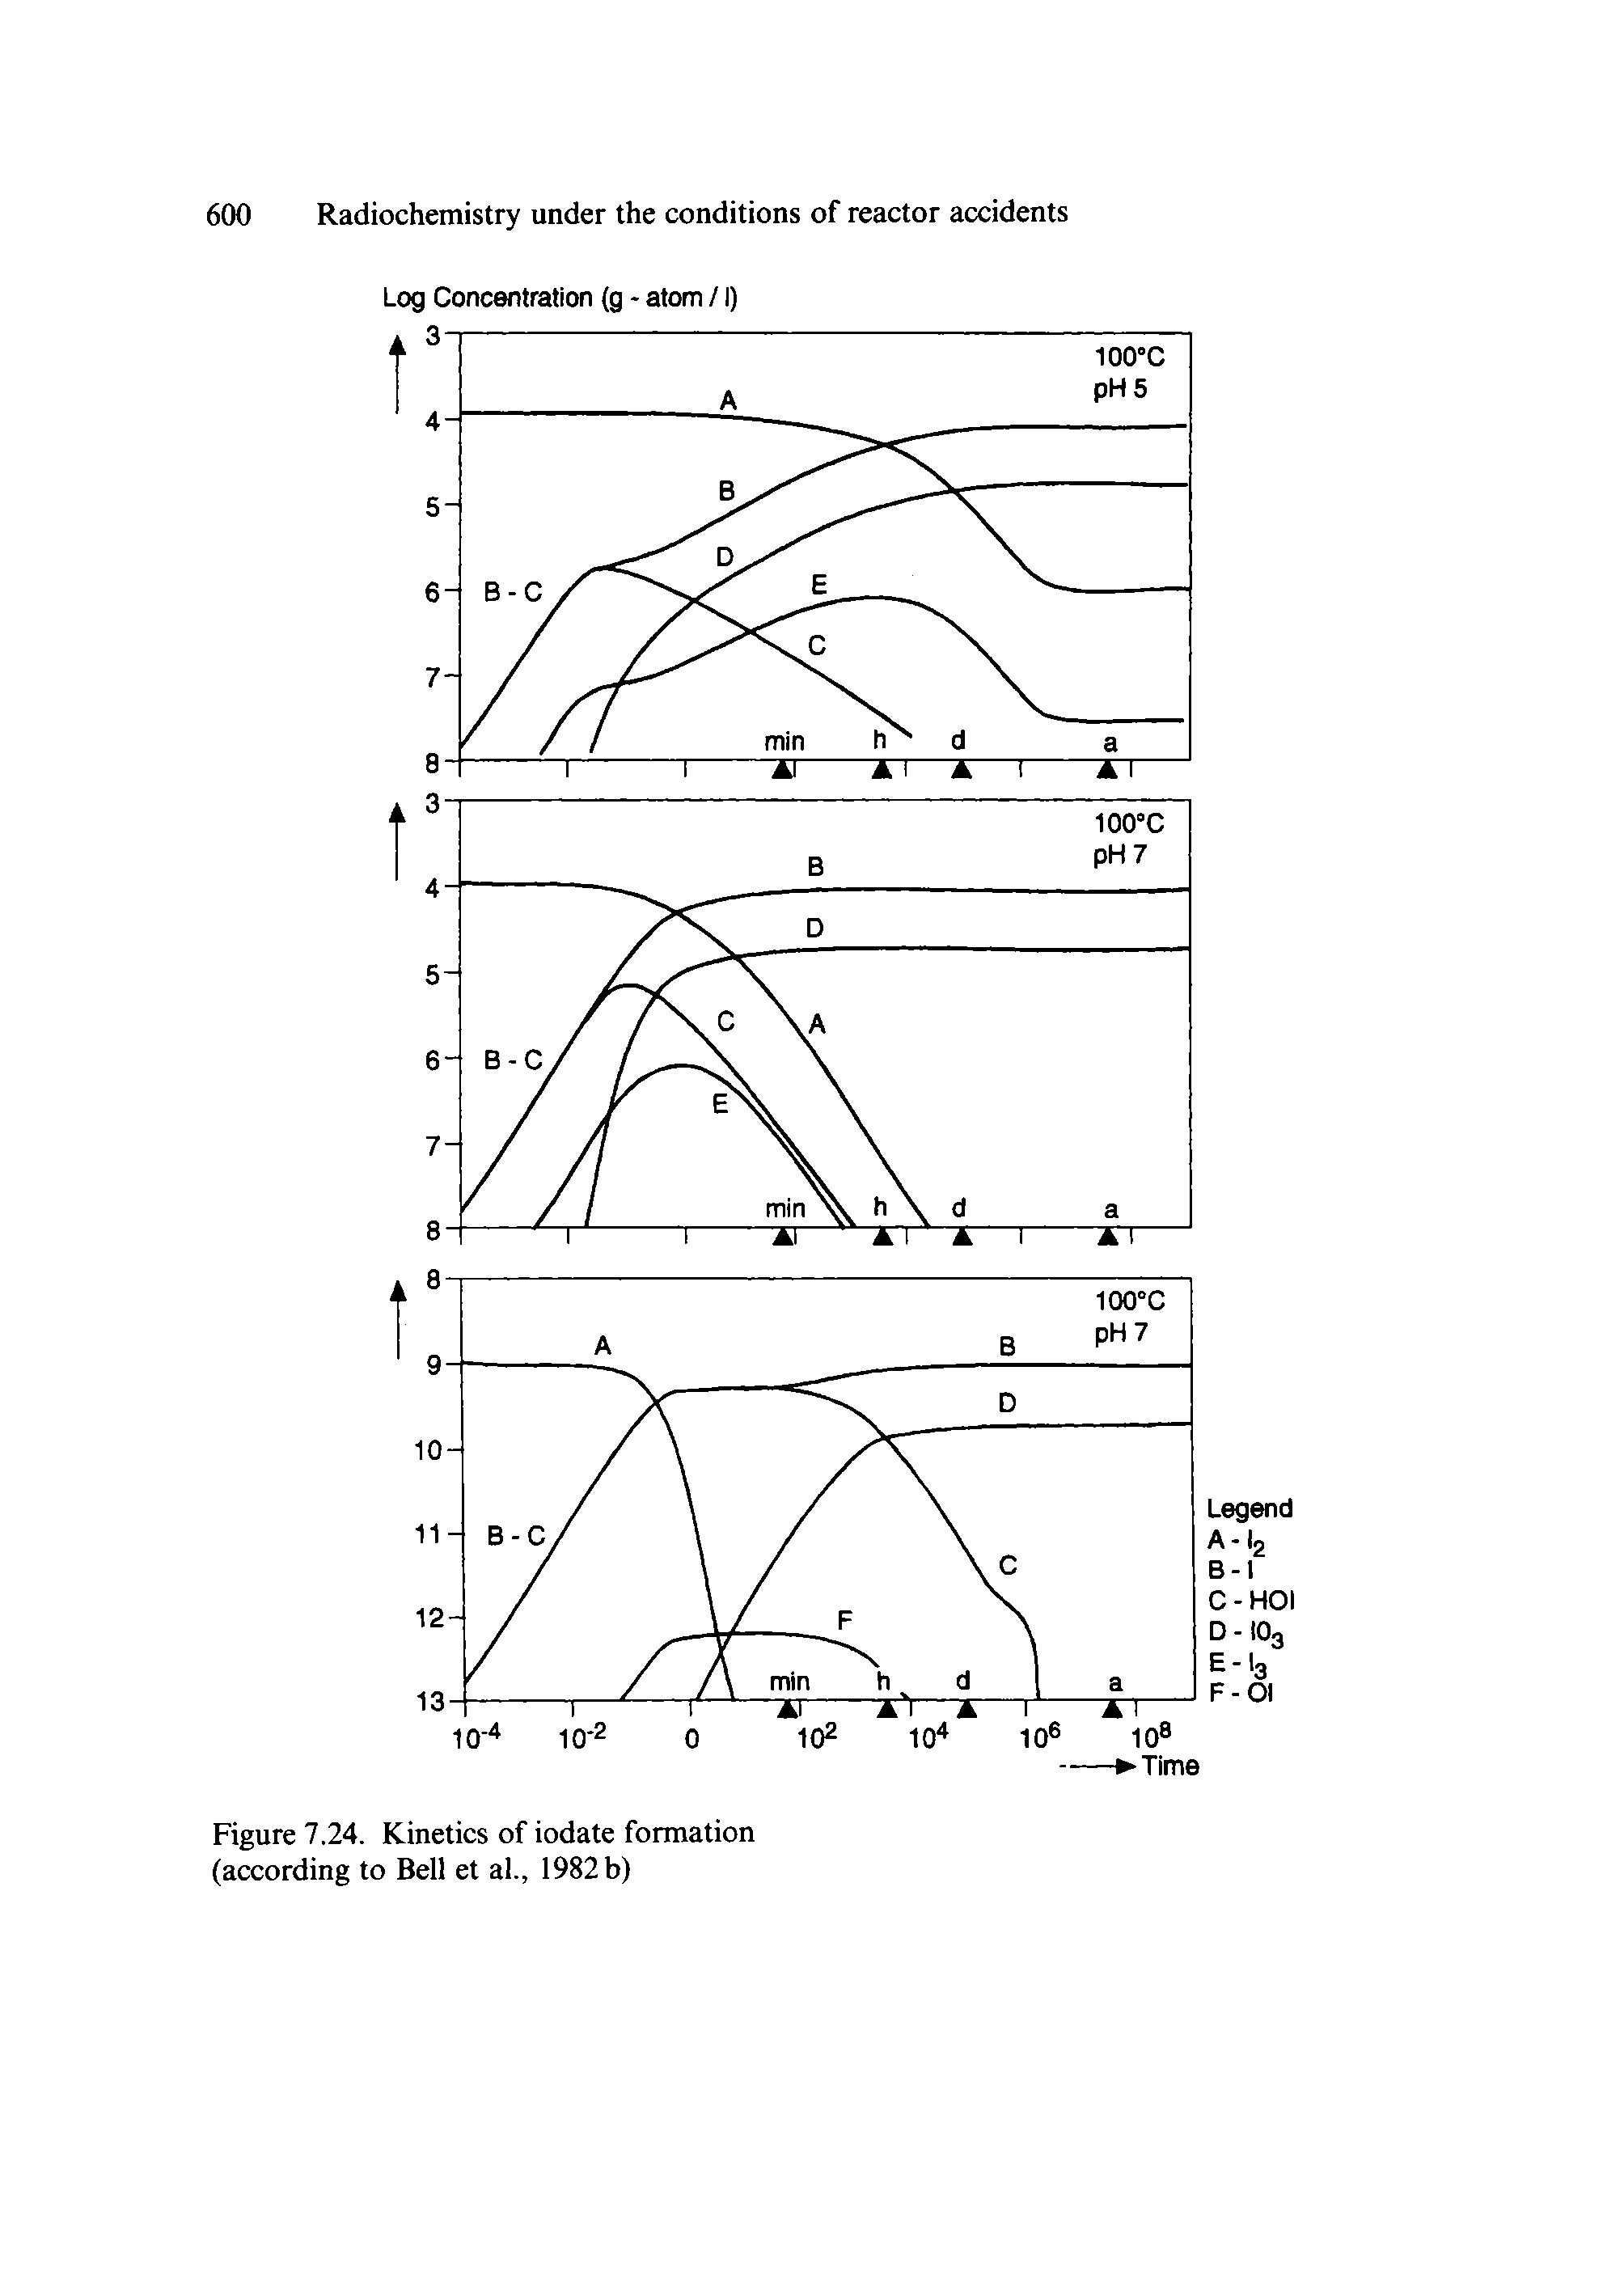 Figure 7.24. Kinetics of iodate formation (according to Bell et al., 1982 b)...